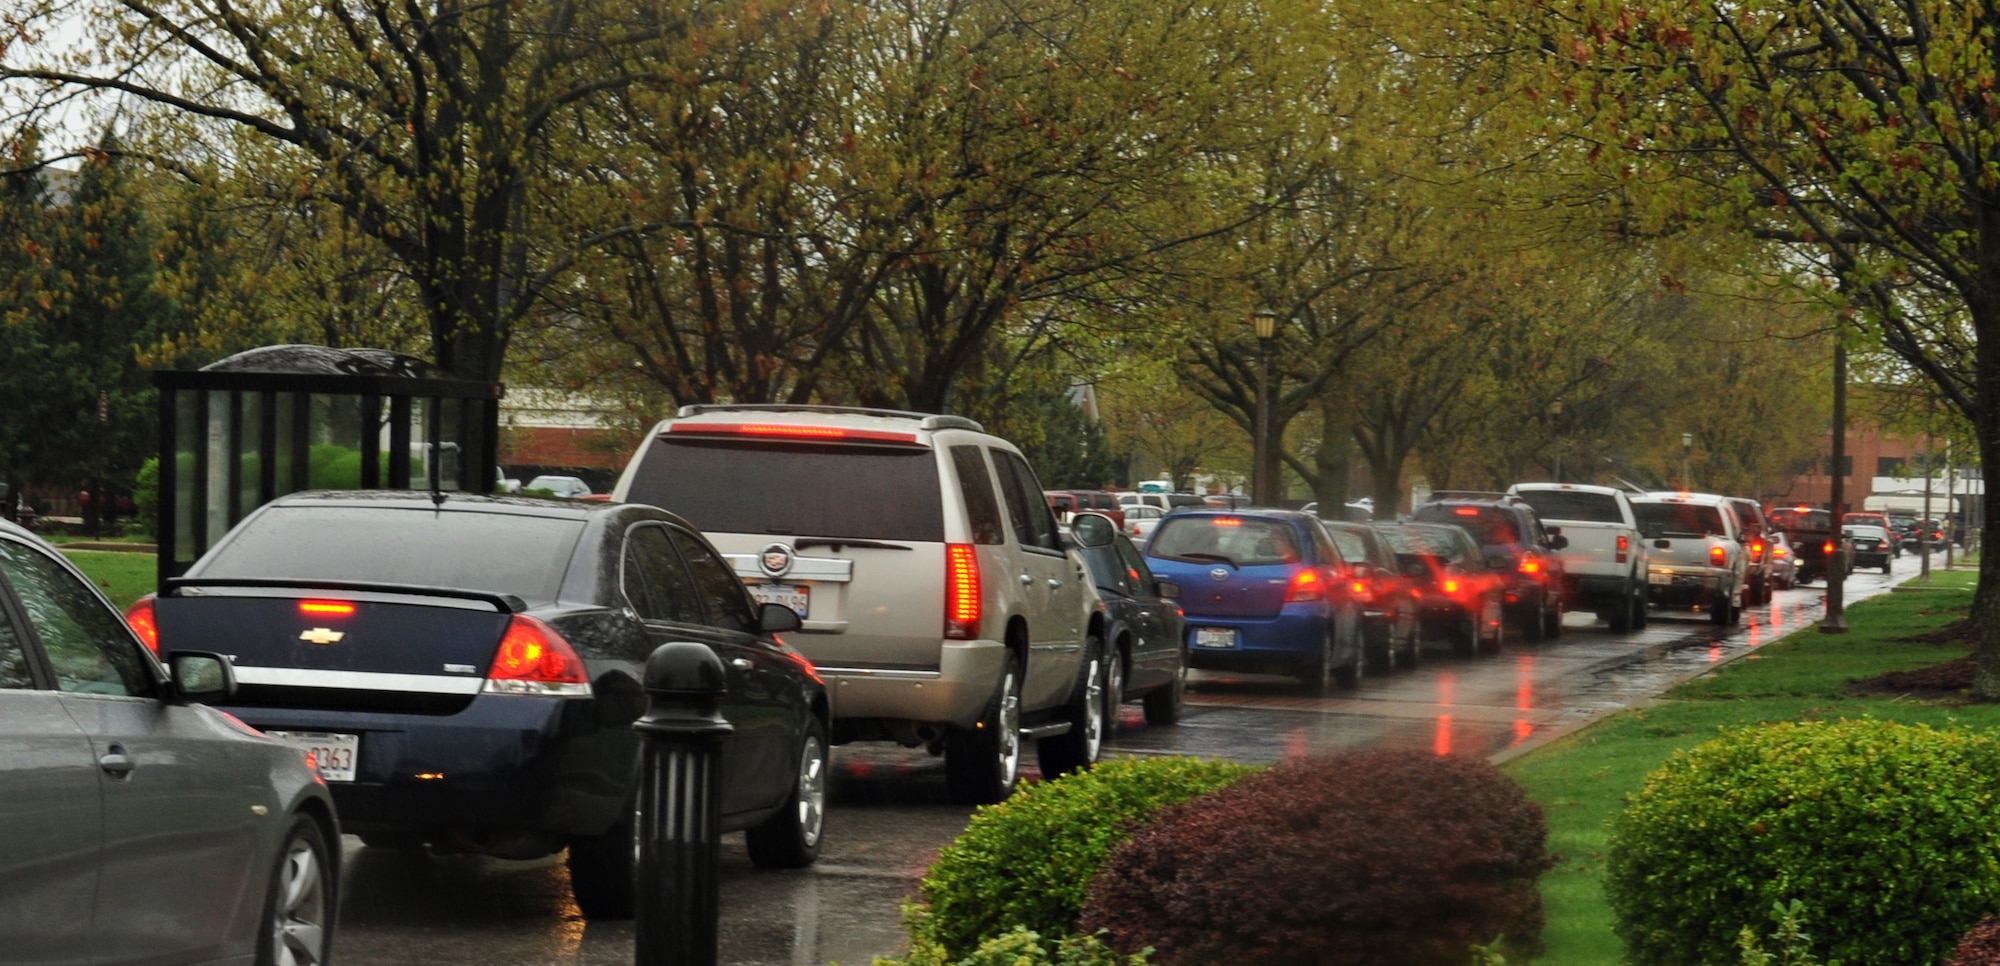 Cars cue up along Heritage Drive waiting to exit Scott Air Force Base, Ill., April. 18, 2013. Between 10:45 a.m. and 4 p.m.  5.2 inches of rain fell.  Commuters waited in line as flooded roads necessitated closing all but Shiloh Gate for exiting the base. Some workers were released early before on- and off-base roads became impassable.  (U.S. Air Force photo/Airman 1st Class Jaeda Waffer)